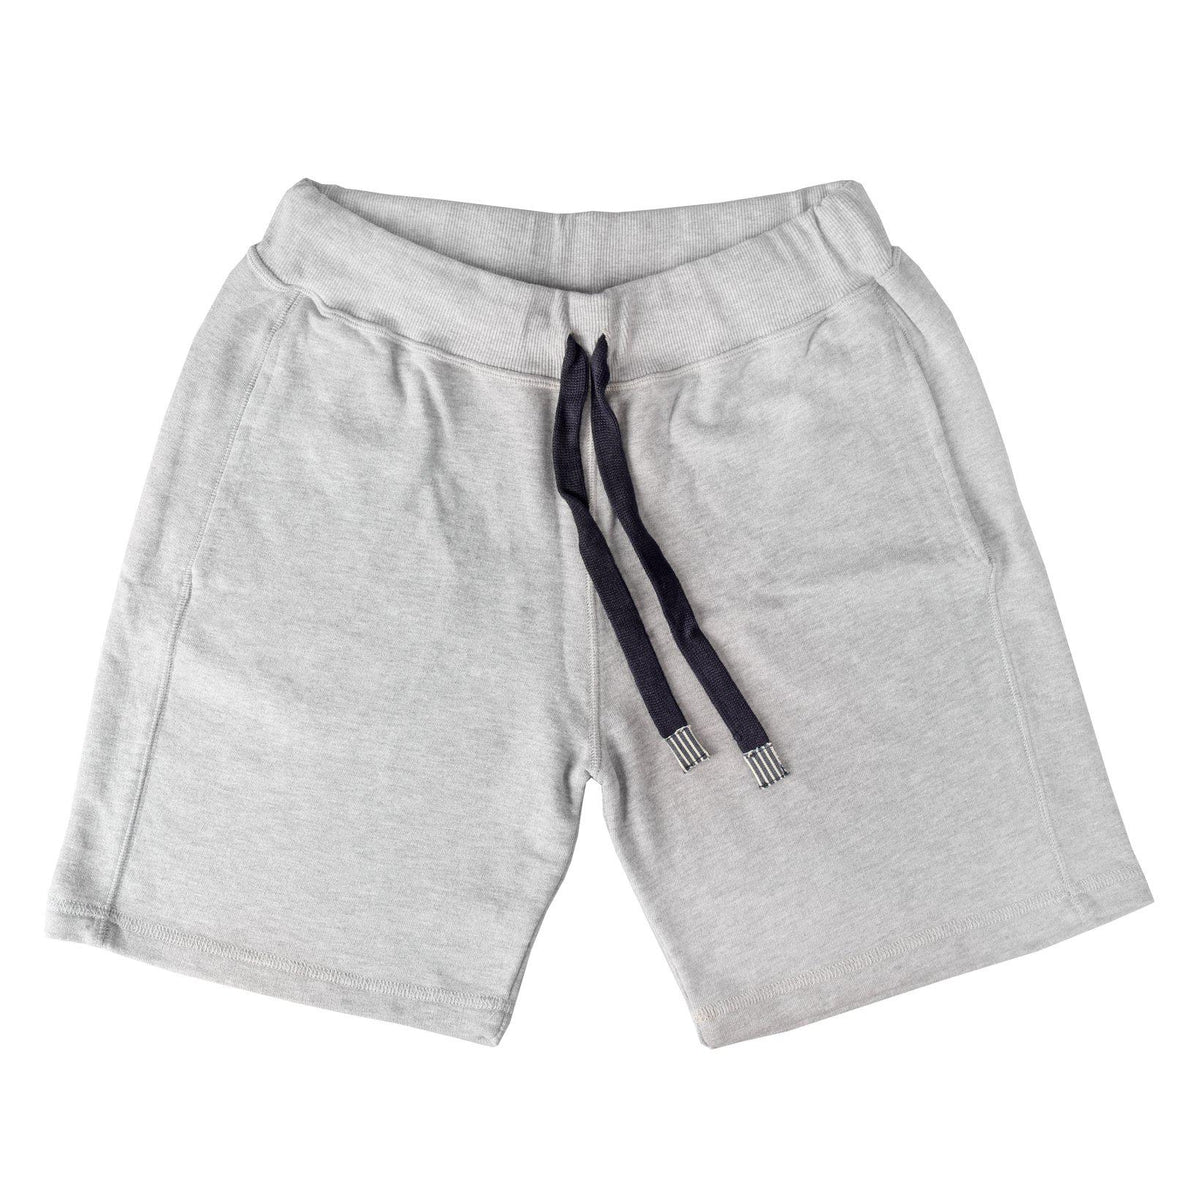 Sweatpants Short-In the box-Conrad Hasselbach Shoes &amp; Garment